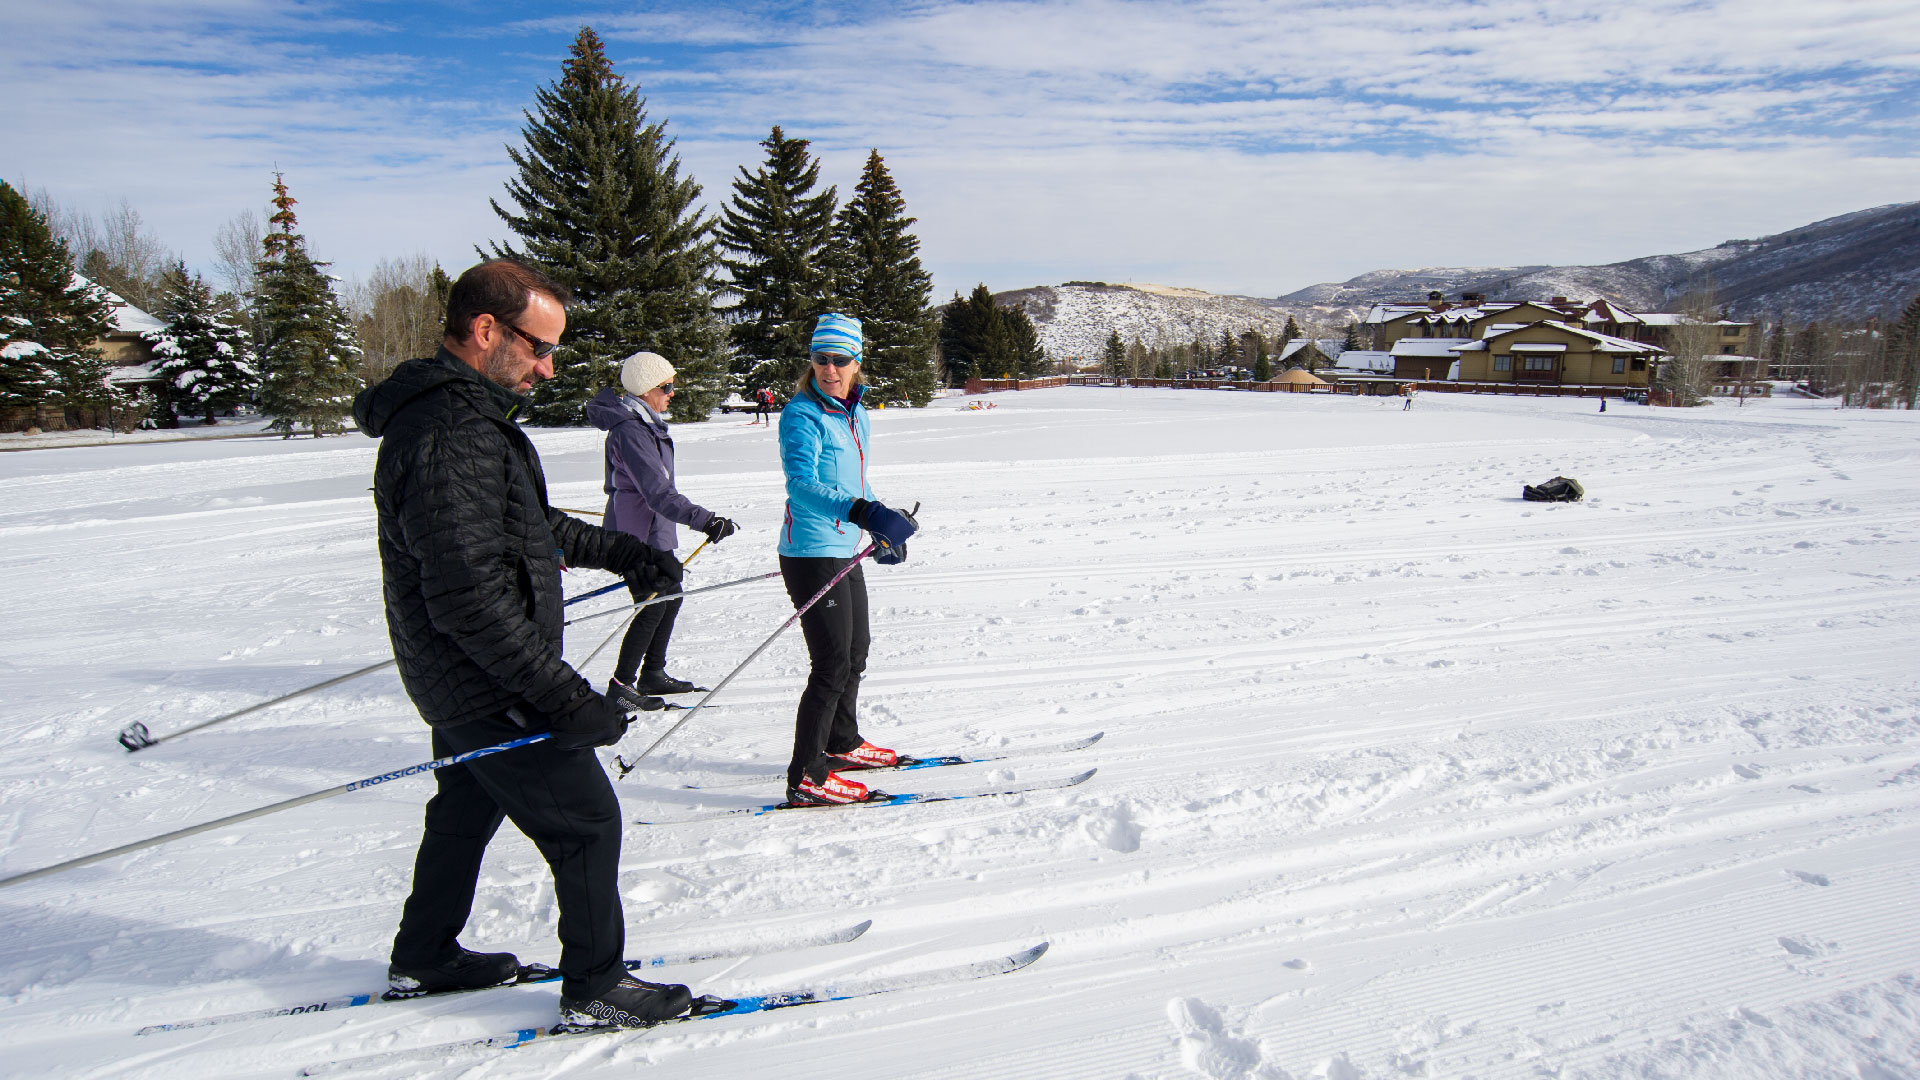 Public Group Classic Lesson in Park City from White Pine Touring in Park City, UT.